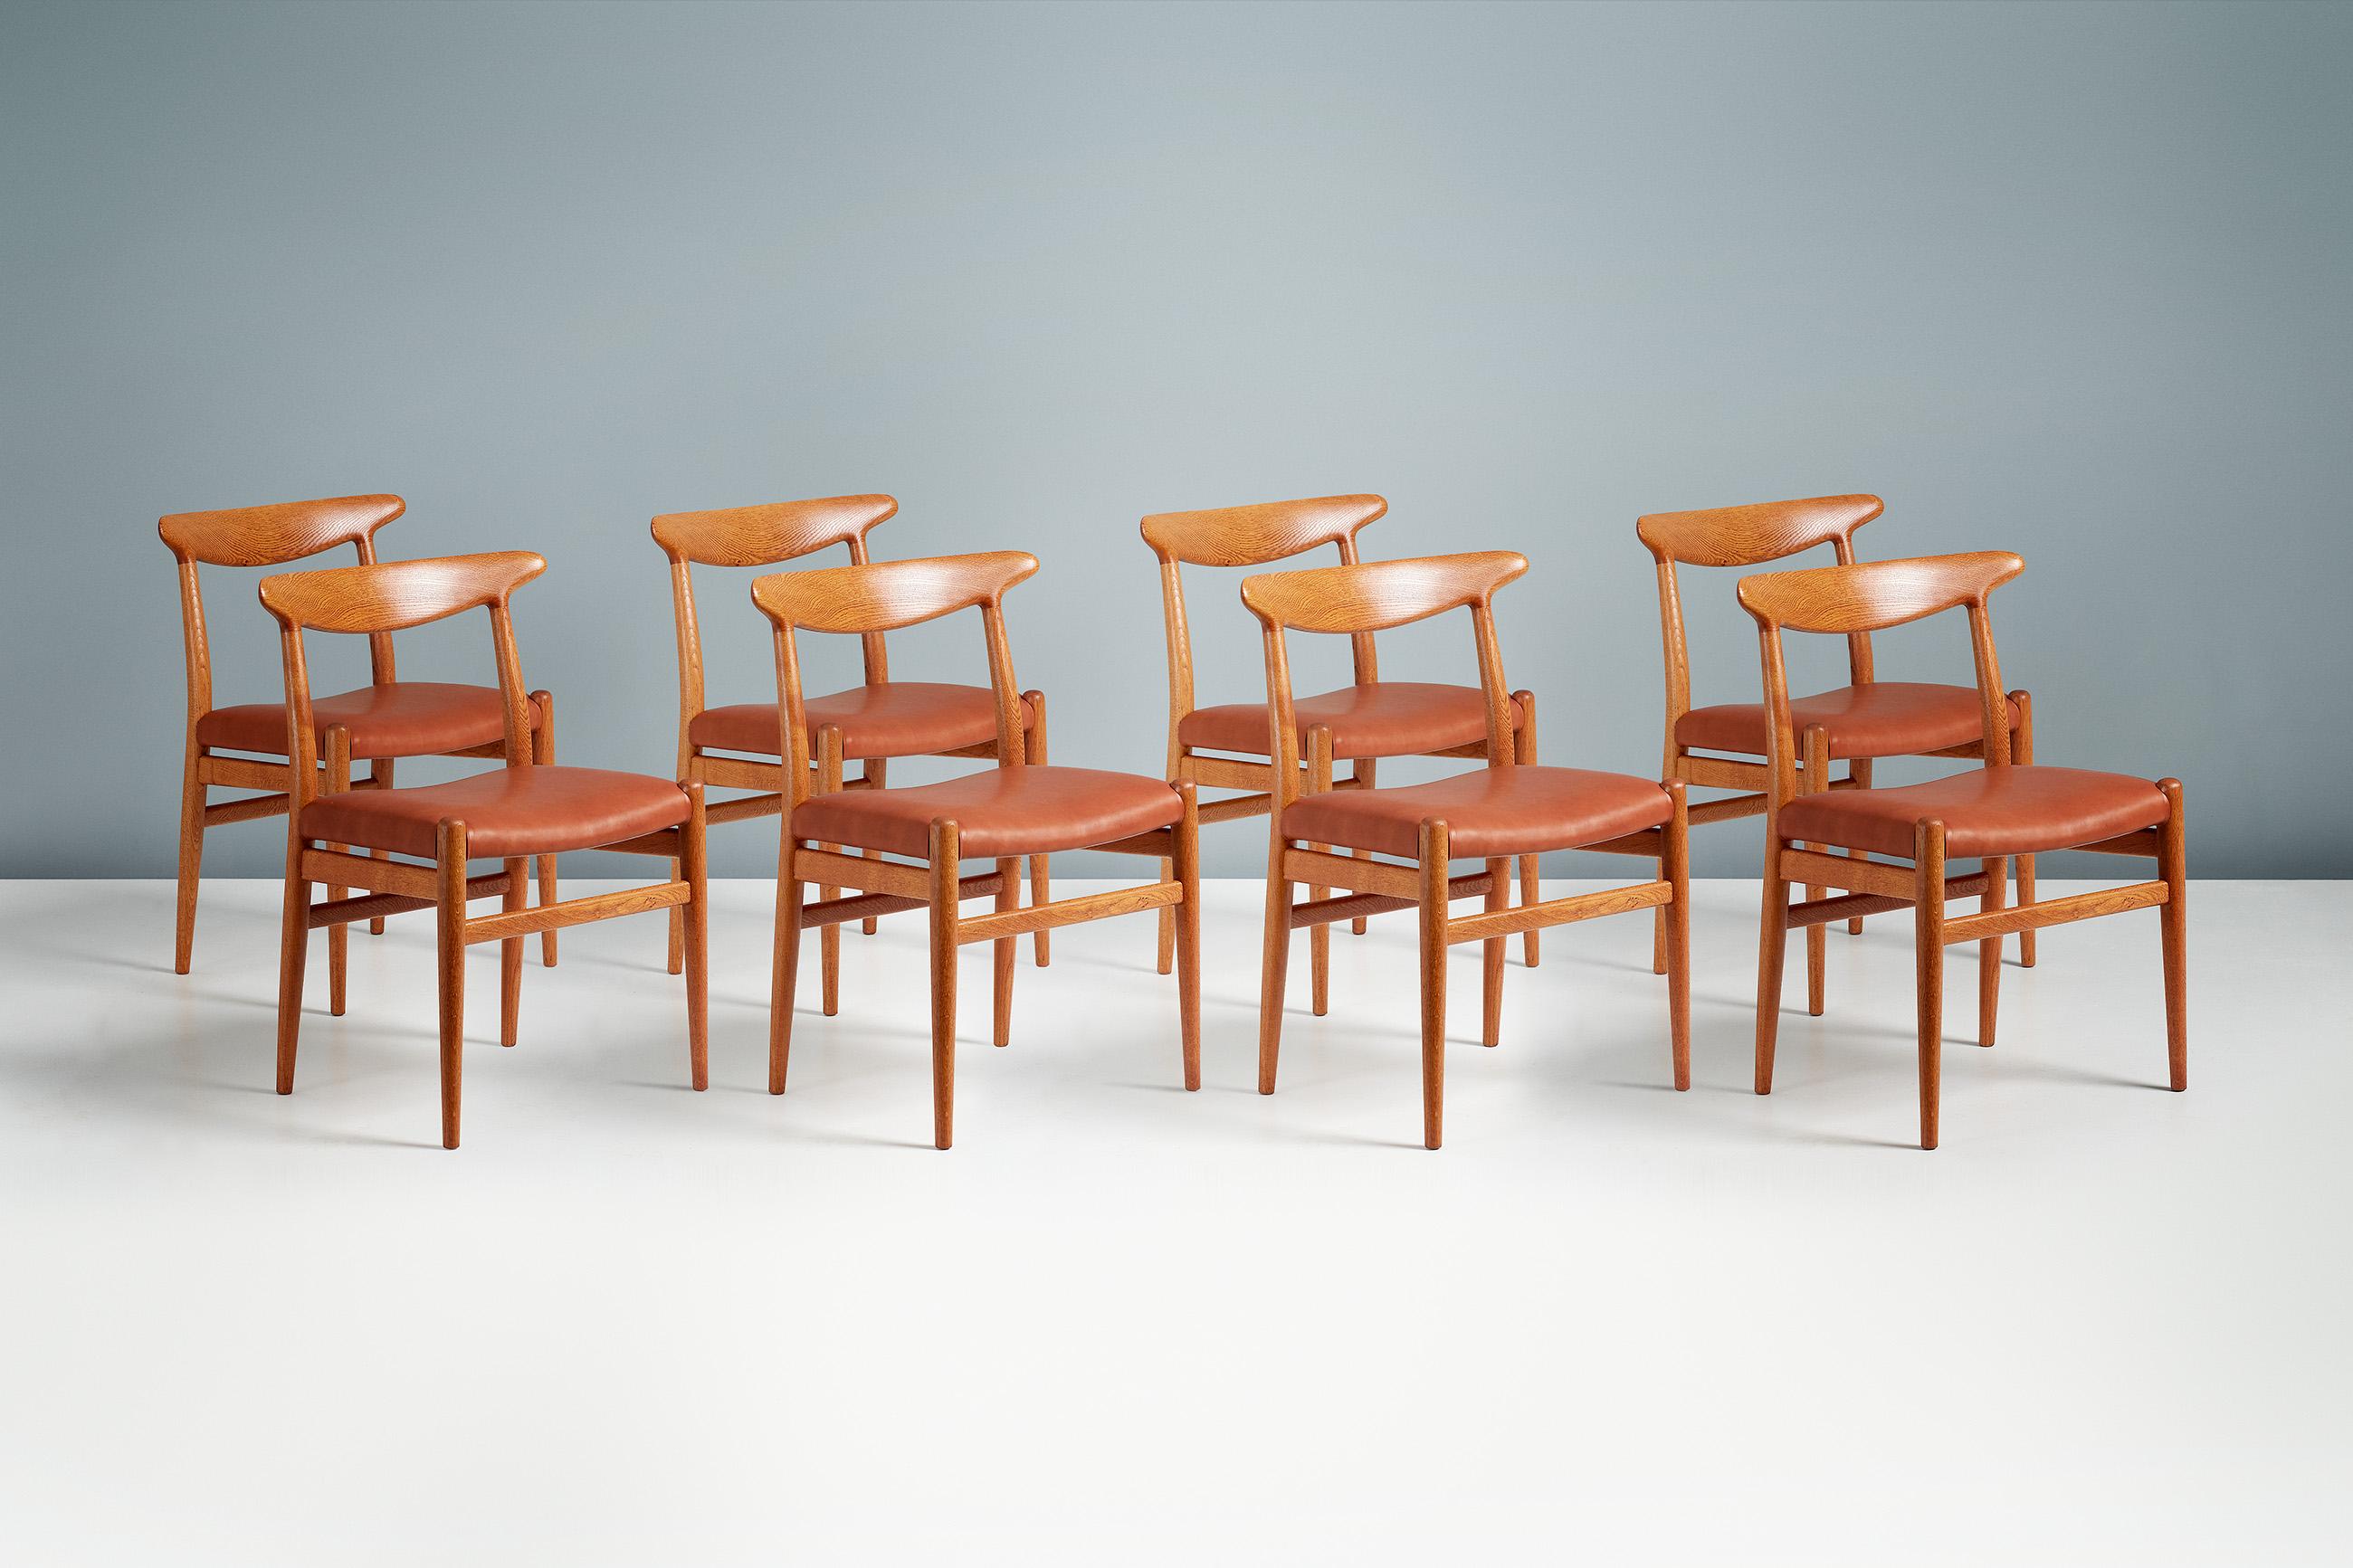 Hans Wegner

W2 Dining Chairs 

Set of 8 Model W2 dining chairs designed produced by C. M. Madsens in Denmark in 1953. Patinated, oiled ok frames with seats upholstered in aniline cognac brown leather.